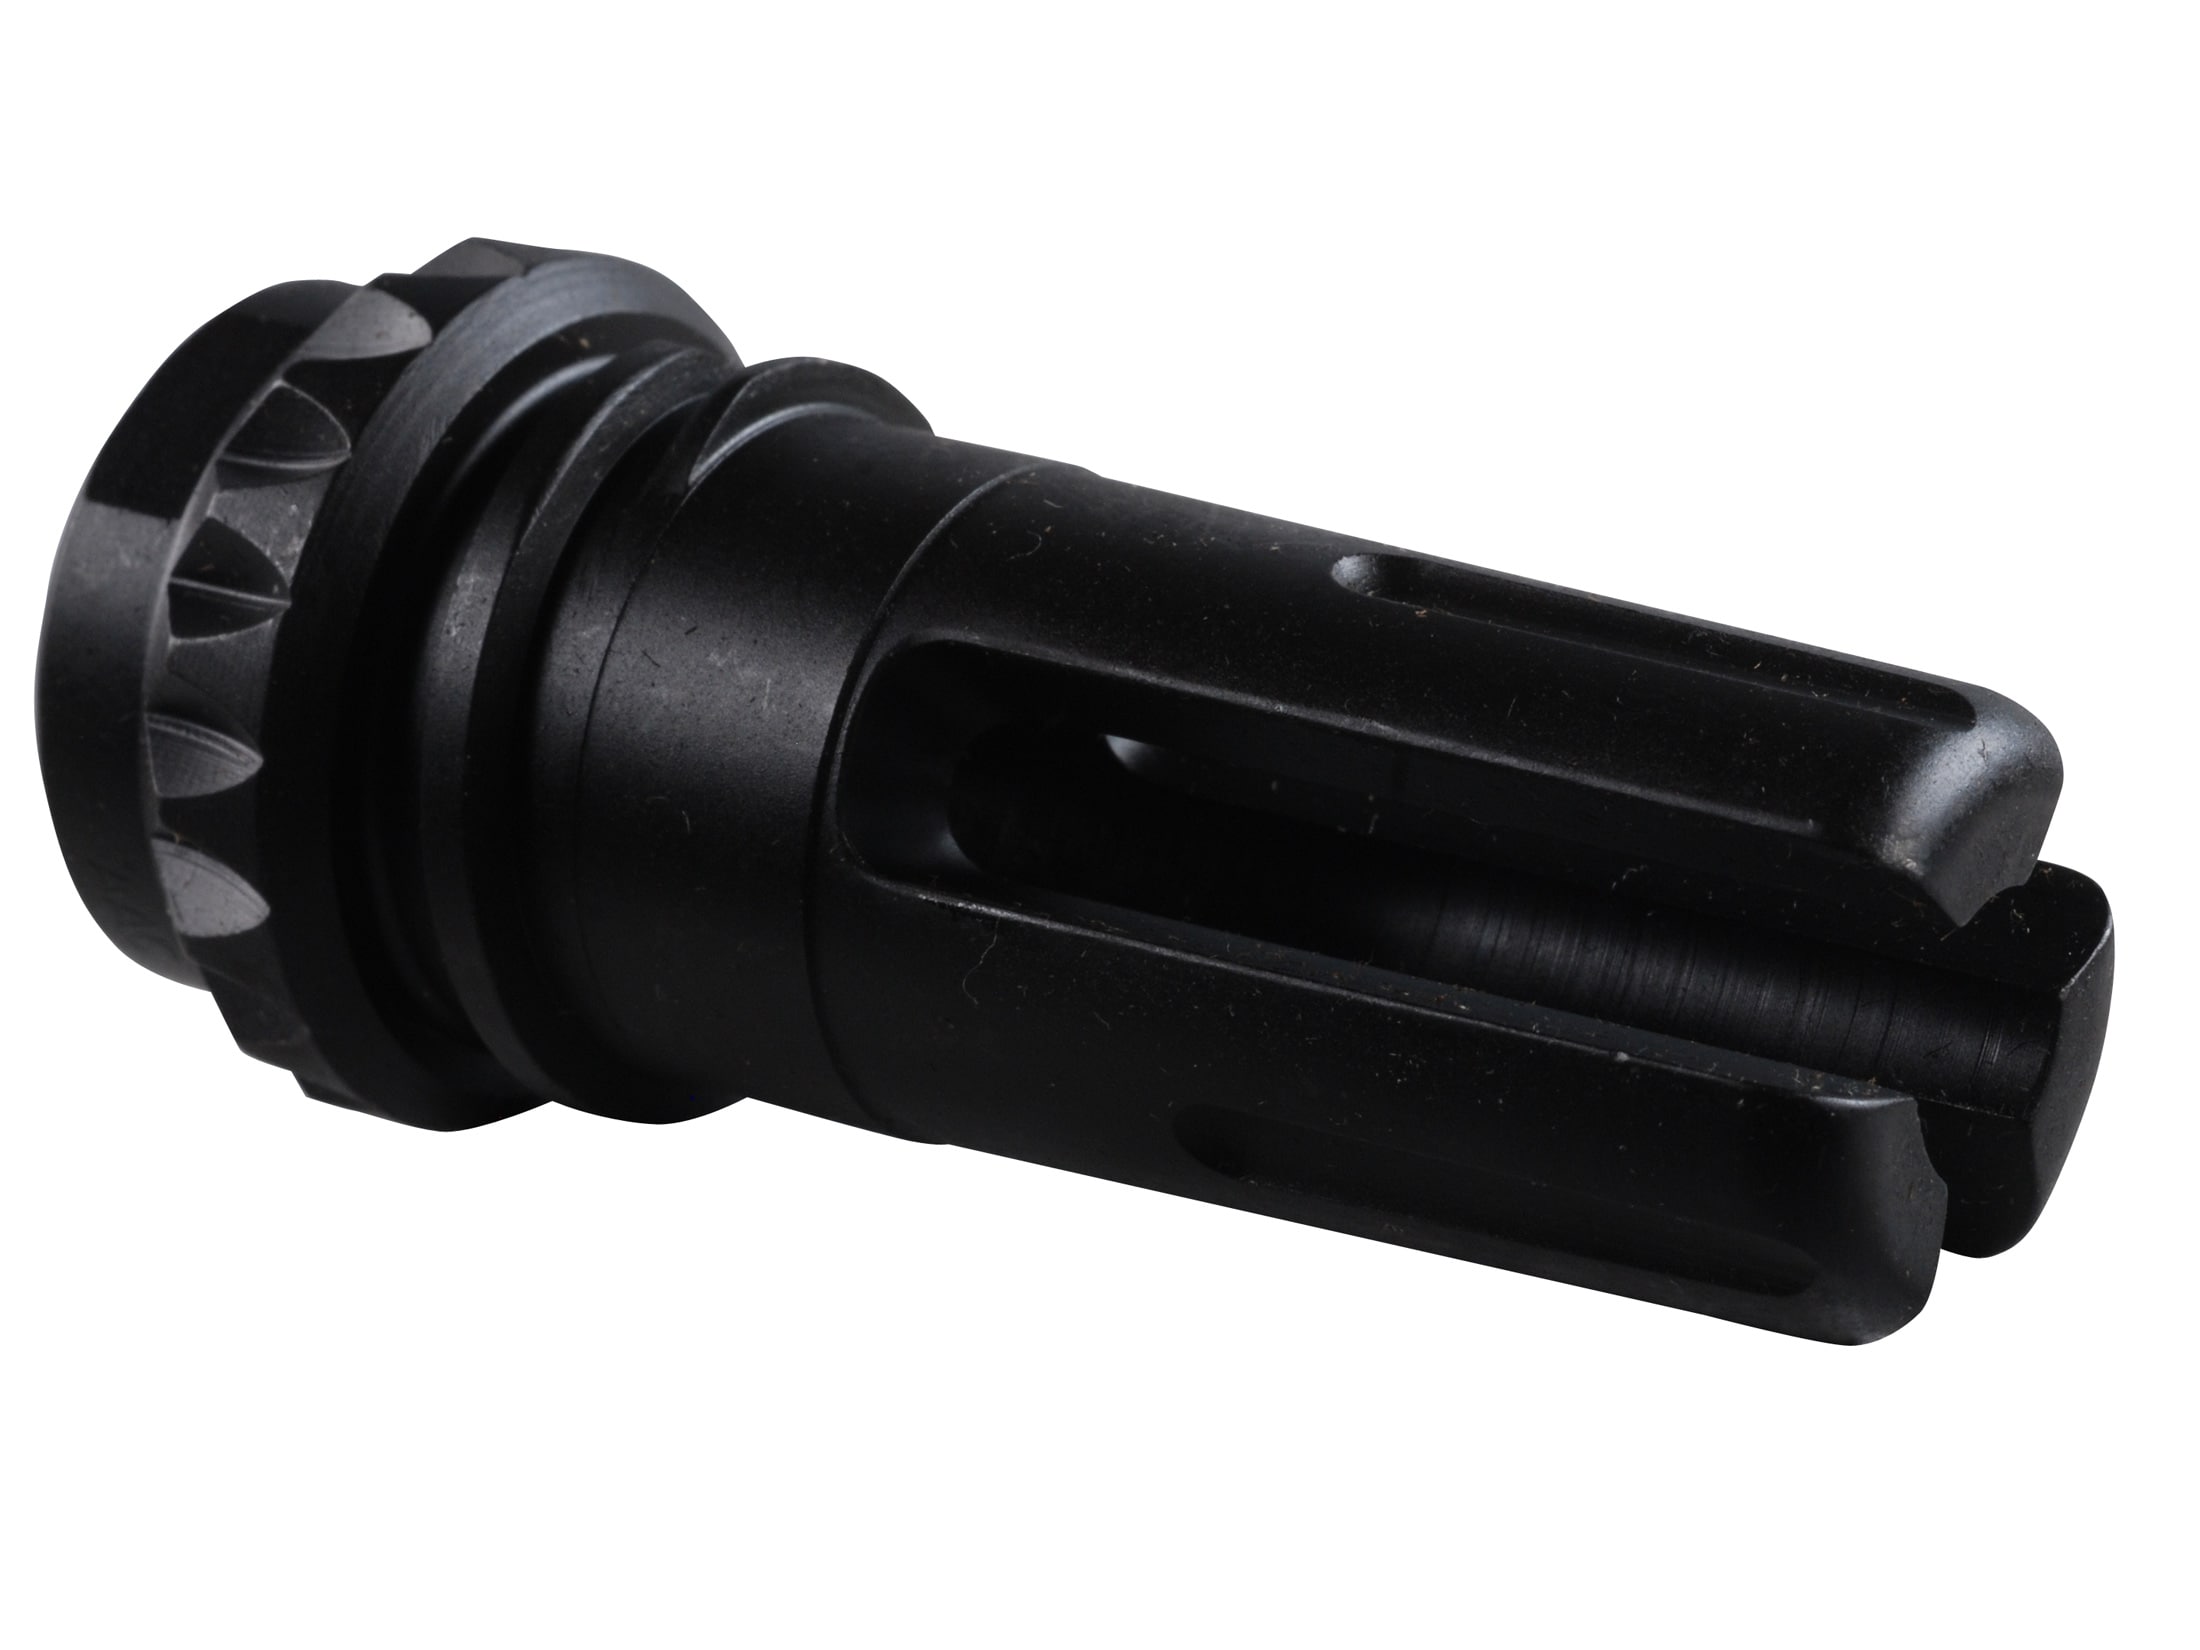 This AAC Blackout Flash Hider is an extremely efficient design that effecti...